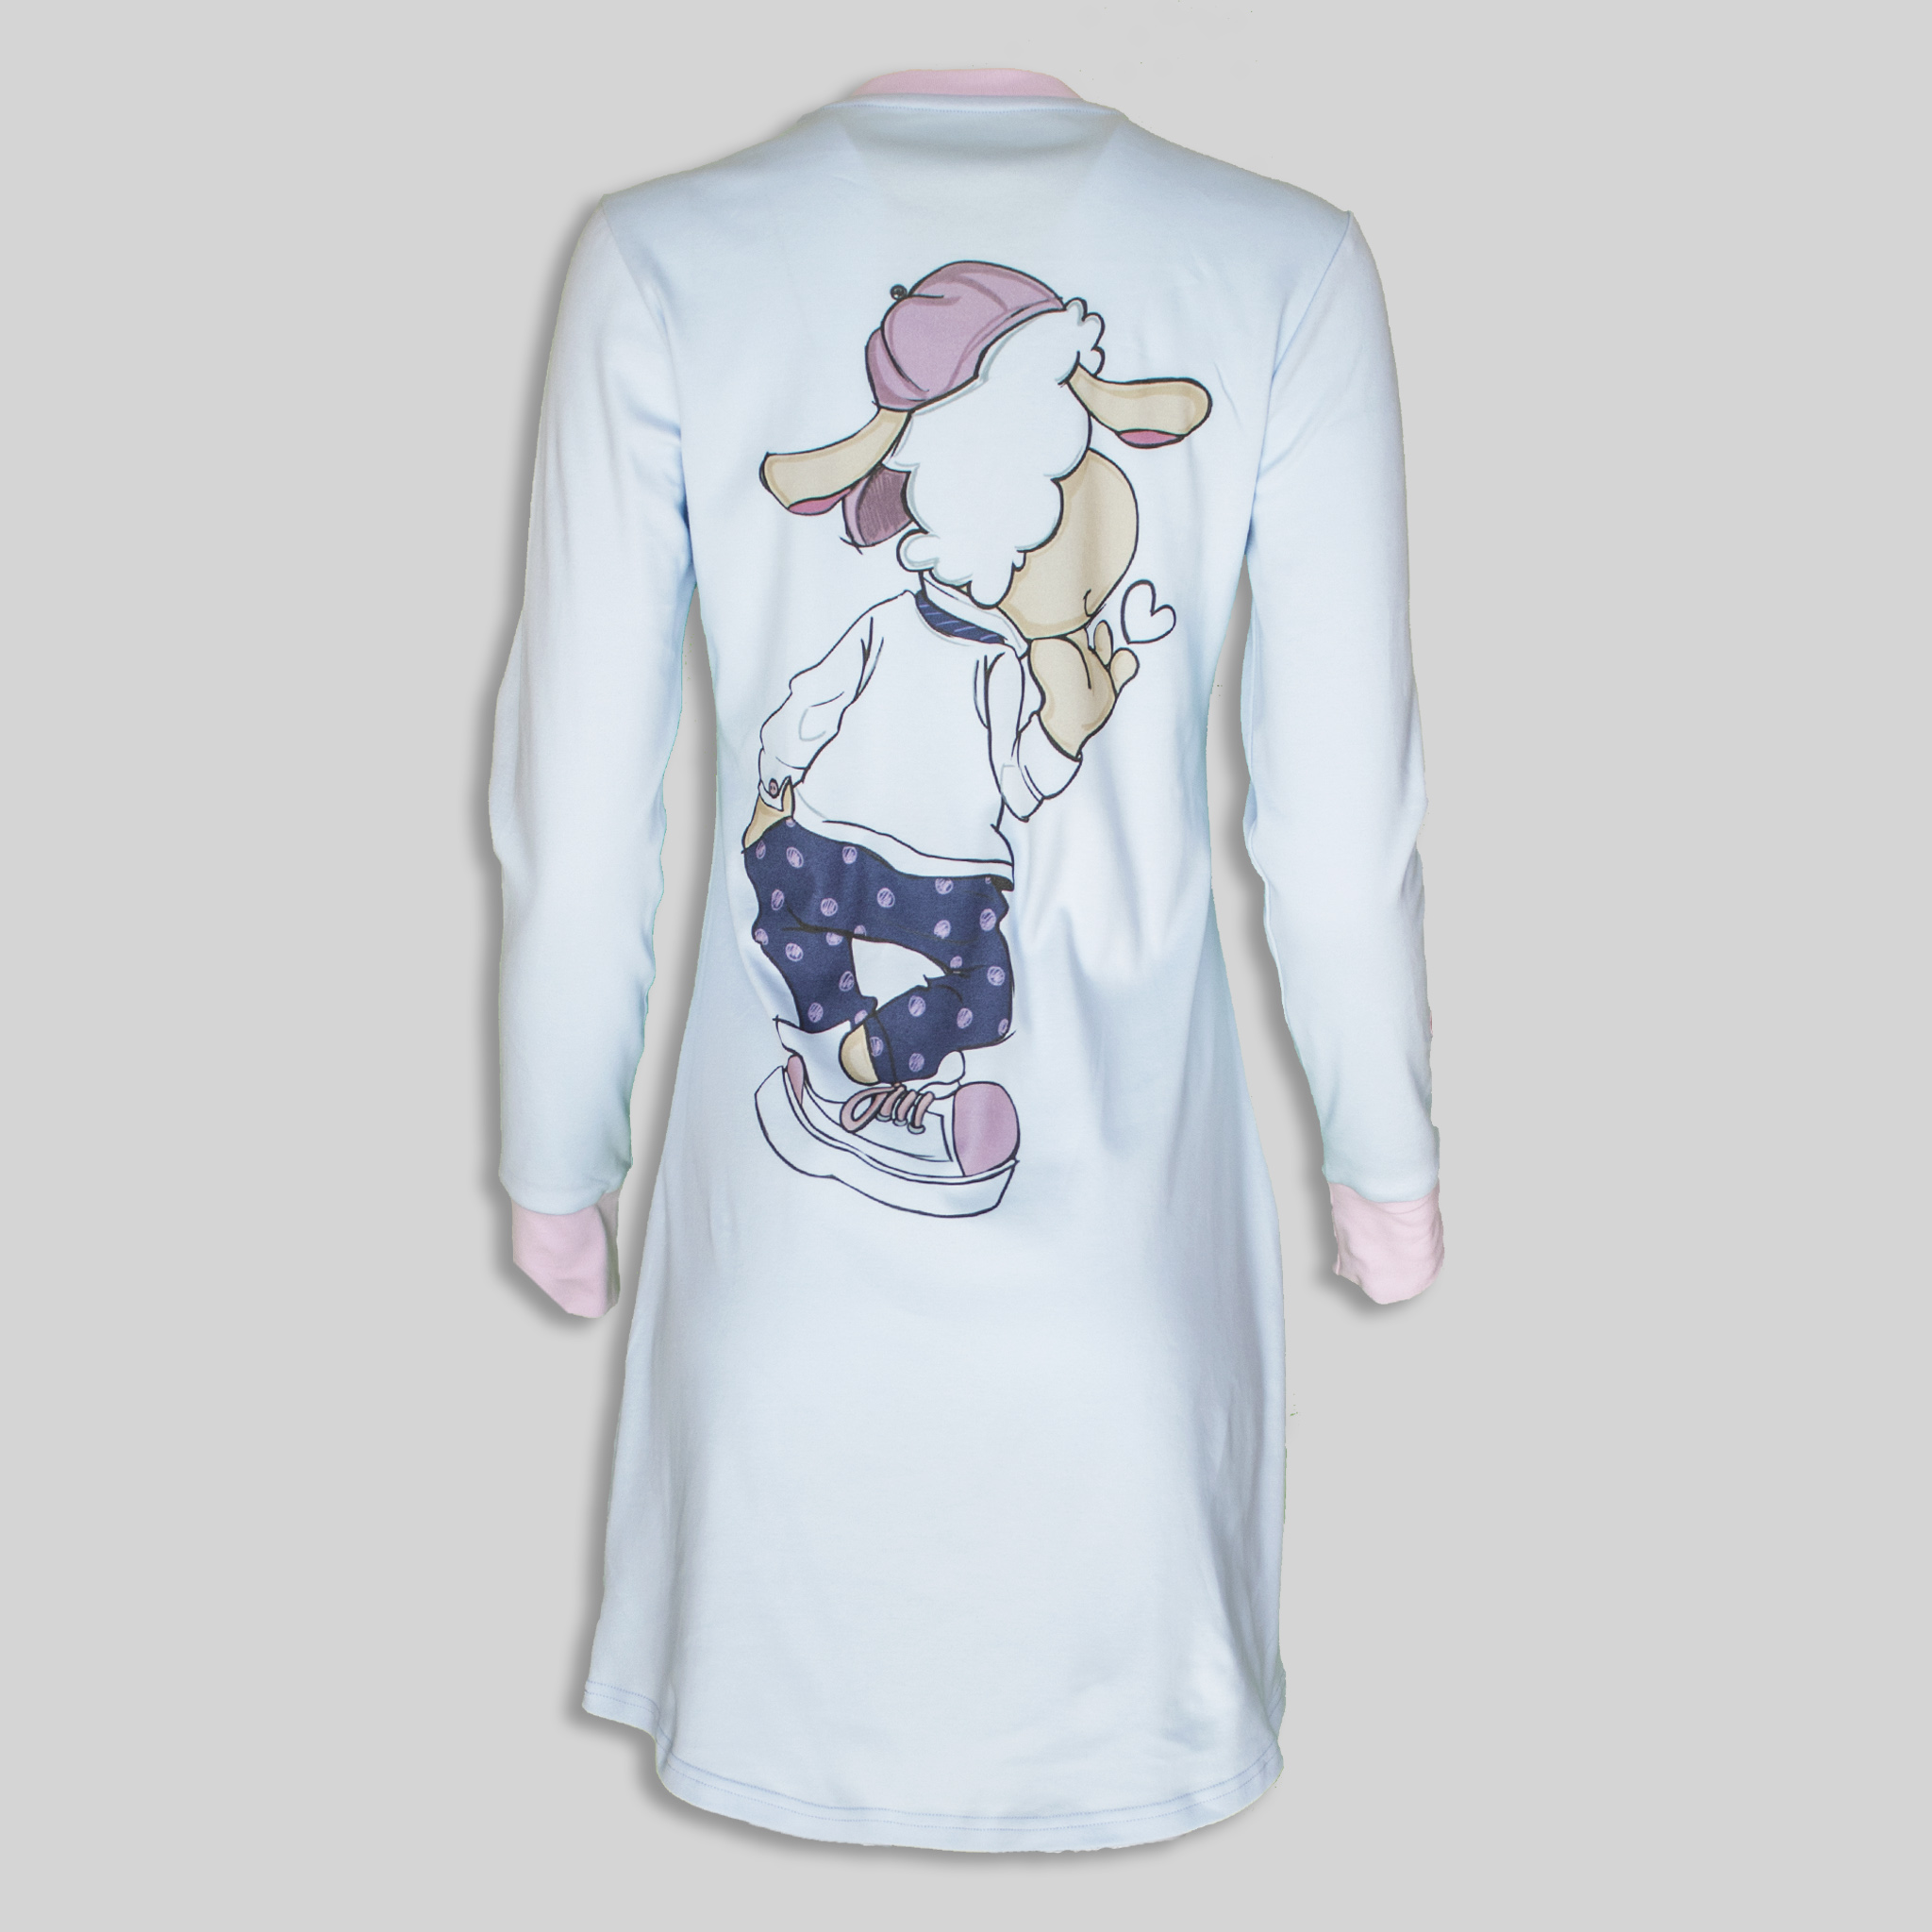 Ladies Nightdress "I send you kisses in blue"